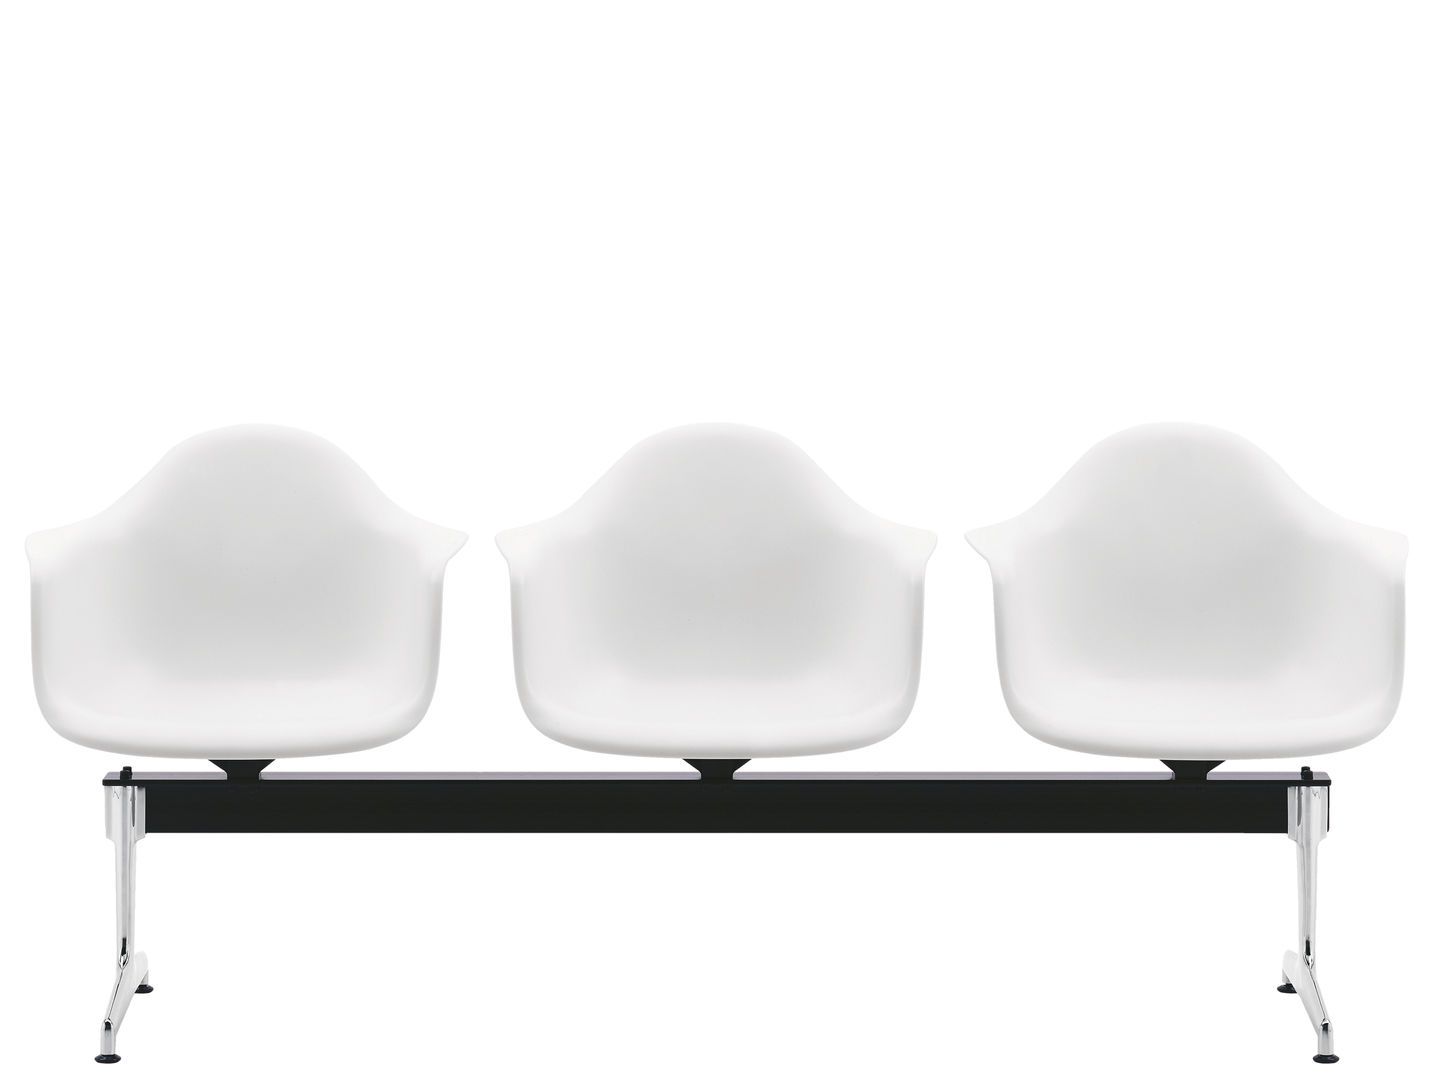 Eames Plastic Armchair beam seating | One52 Furniture 